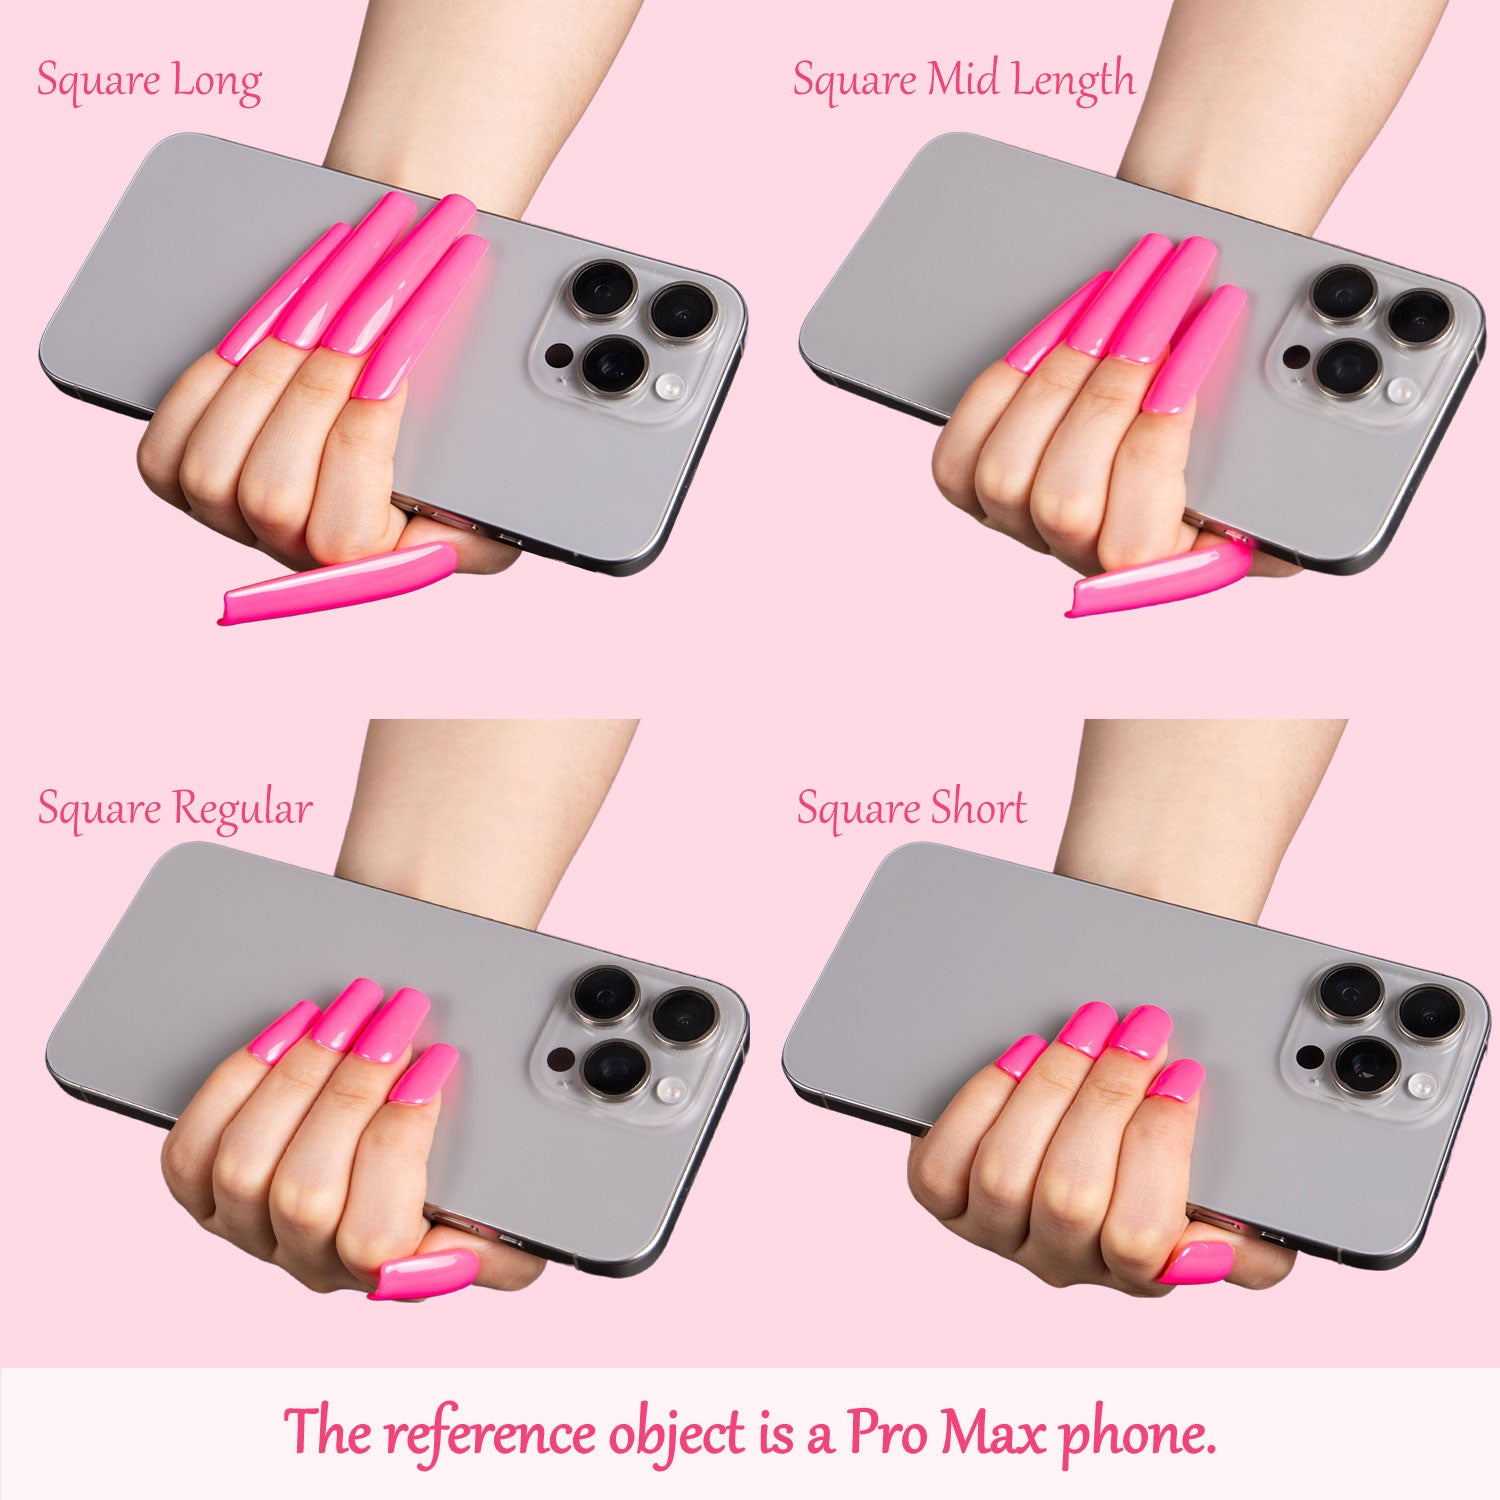 Comparison of four lengths of square-shaped pink press-on nails, labeled as Square Long, Square Mid Length, Square Regular, and Square Short, with a Pro Max phone for scale.